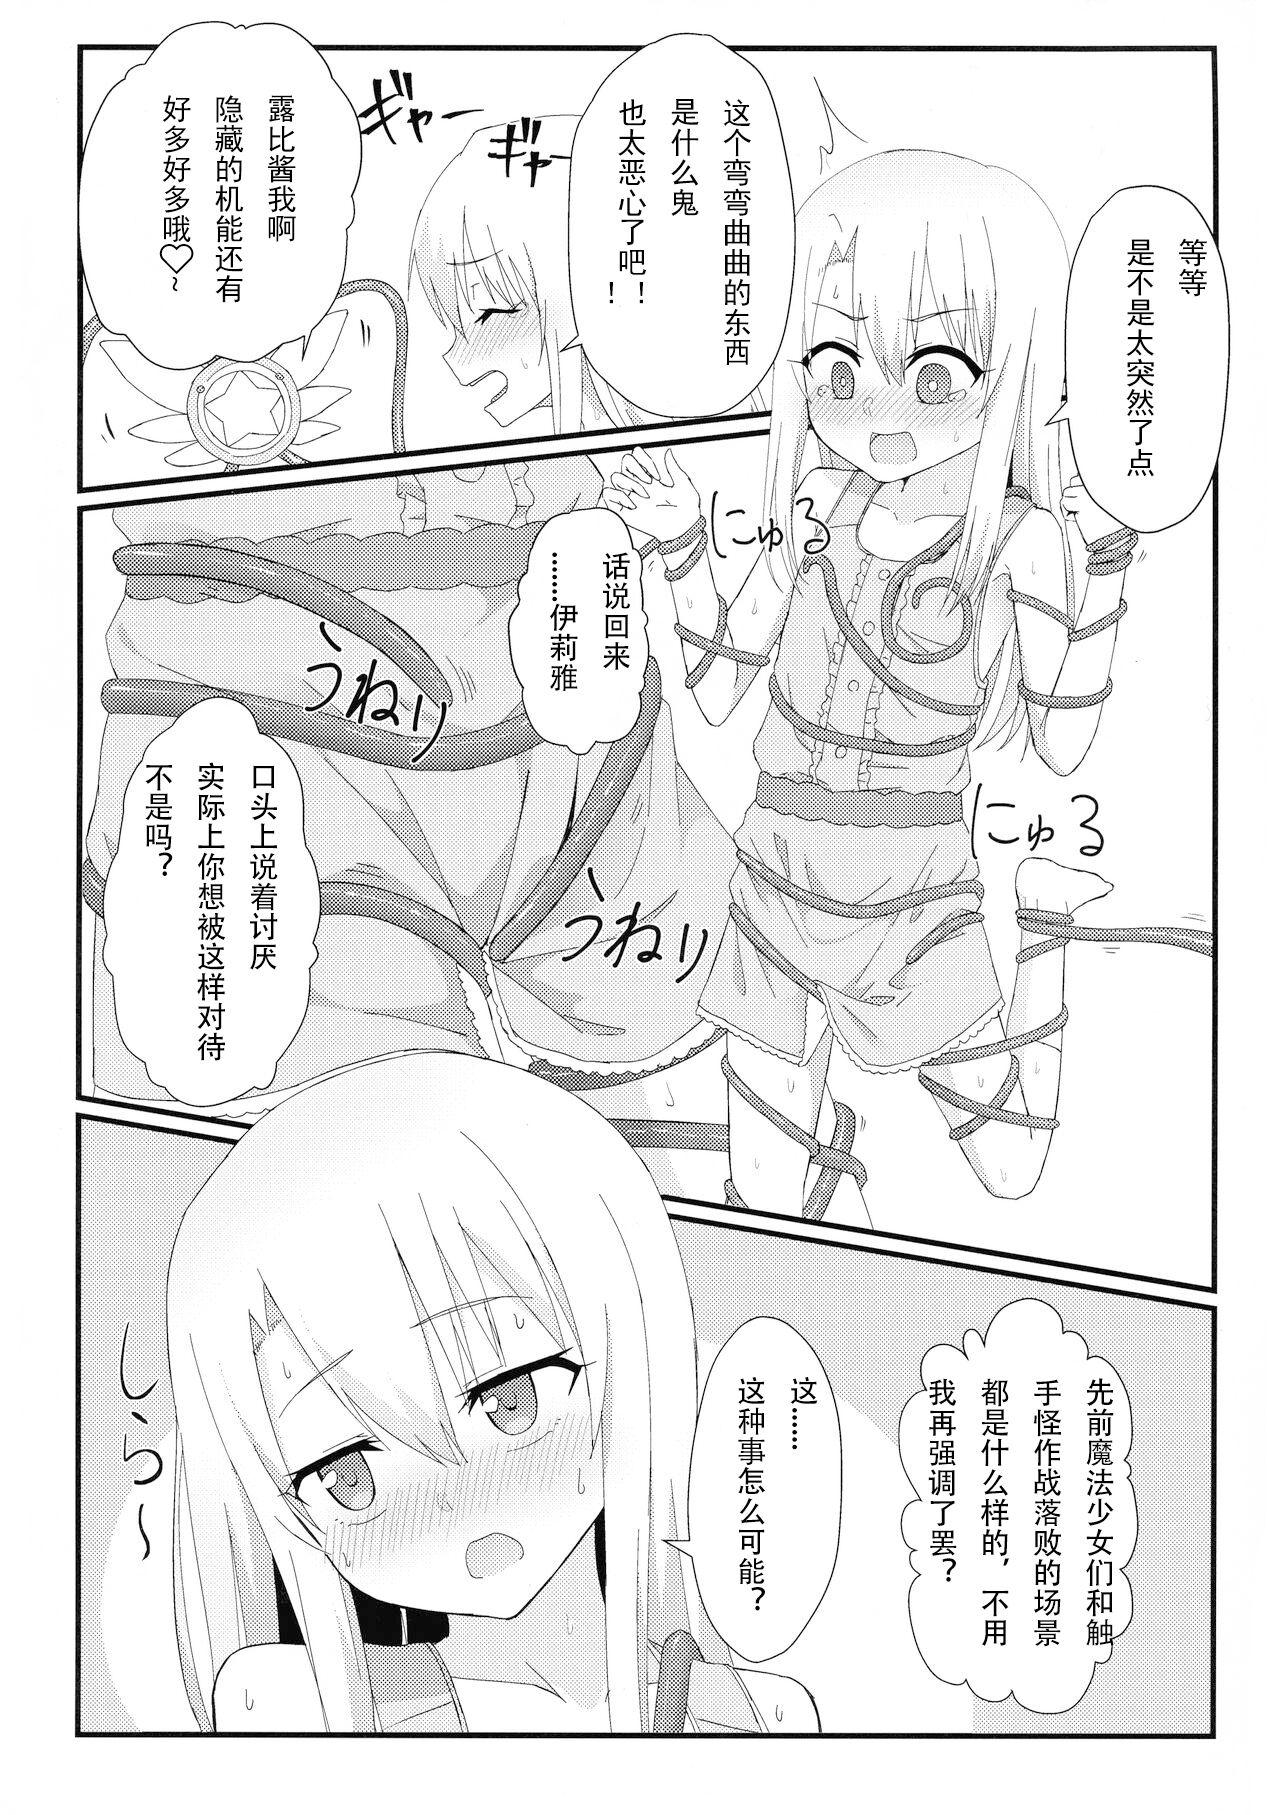 Pete Illya to Ruby Etchi Etchi Secret Function - Fate kaleid liner prisma illya Pain - Page 4